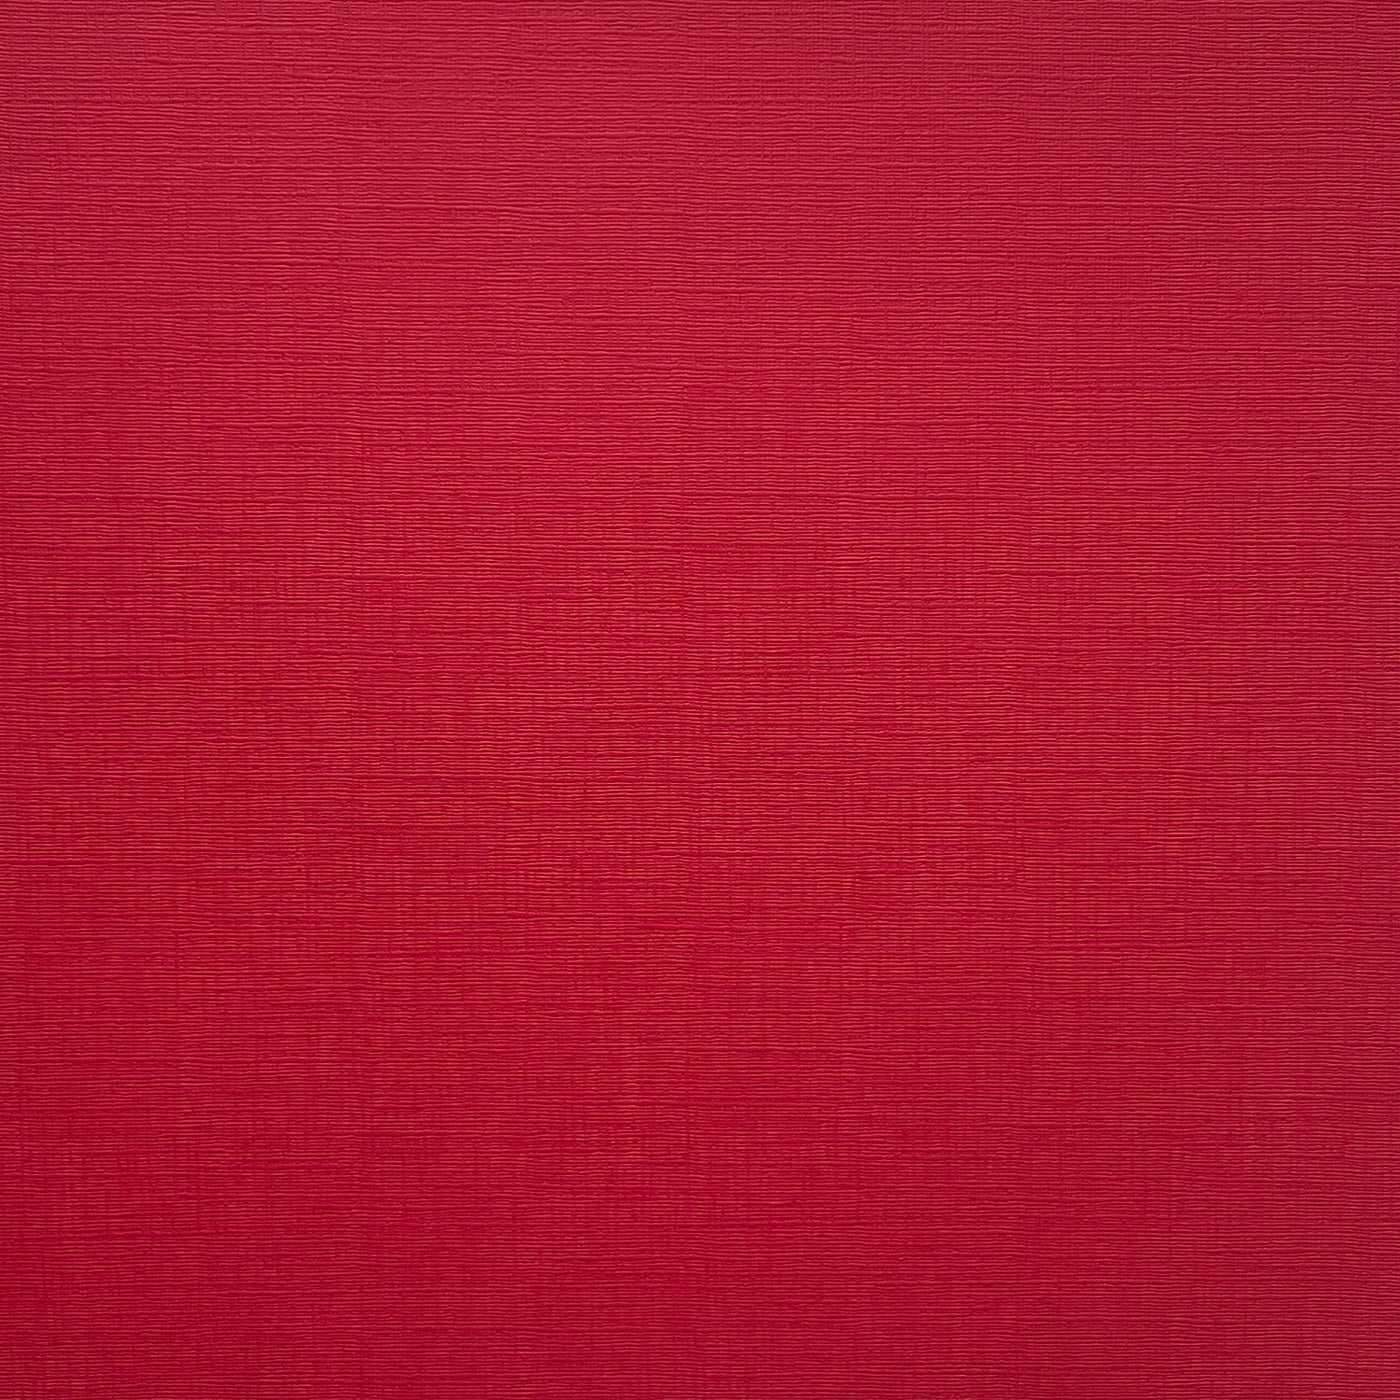 Red Cherry - Textured 12x12 Cardstock - Rose red canvas scrapbook paper